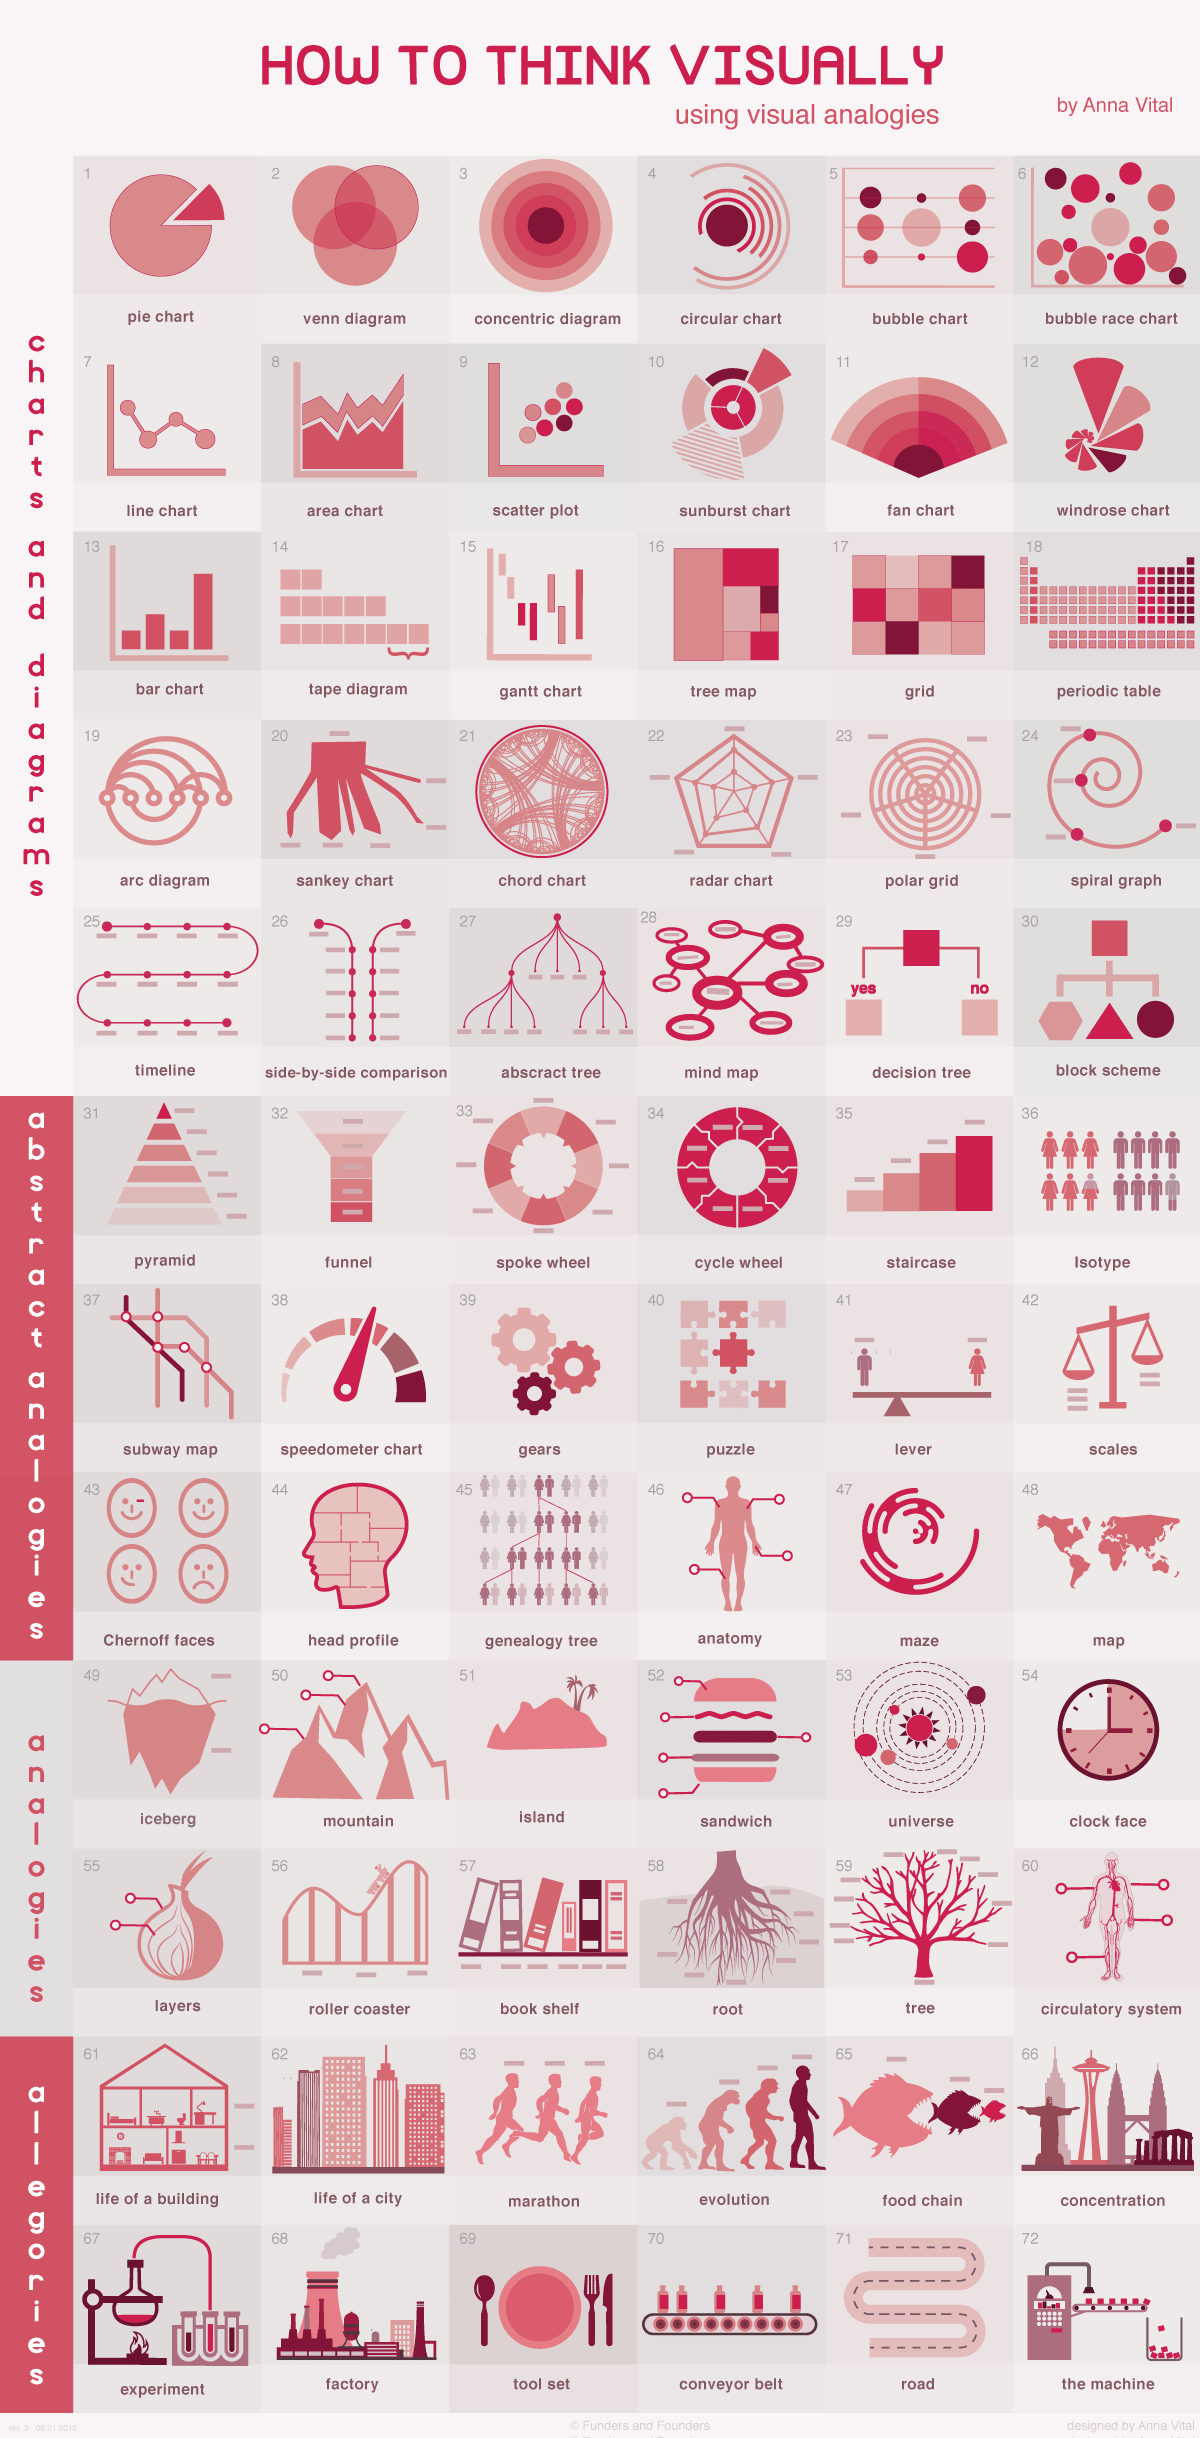 20 FREE Visualization Cheat Sheets For Every Data Scientist to DOWNLOAD.